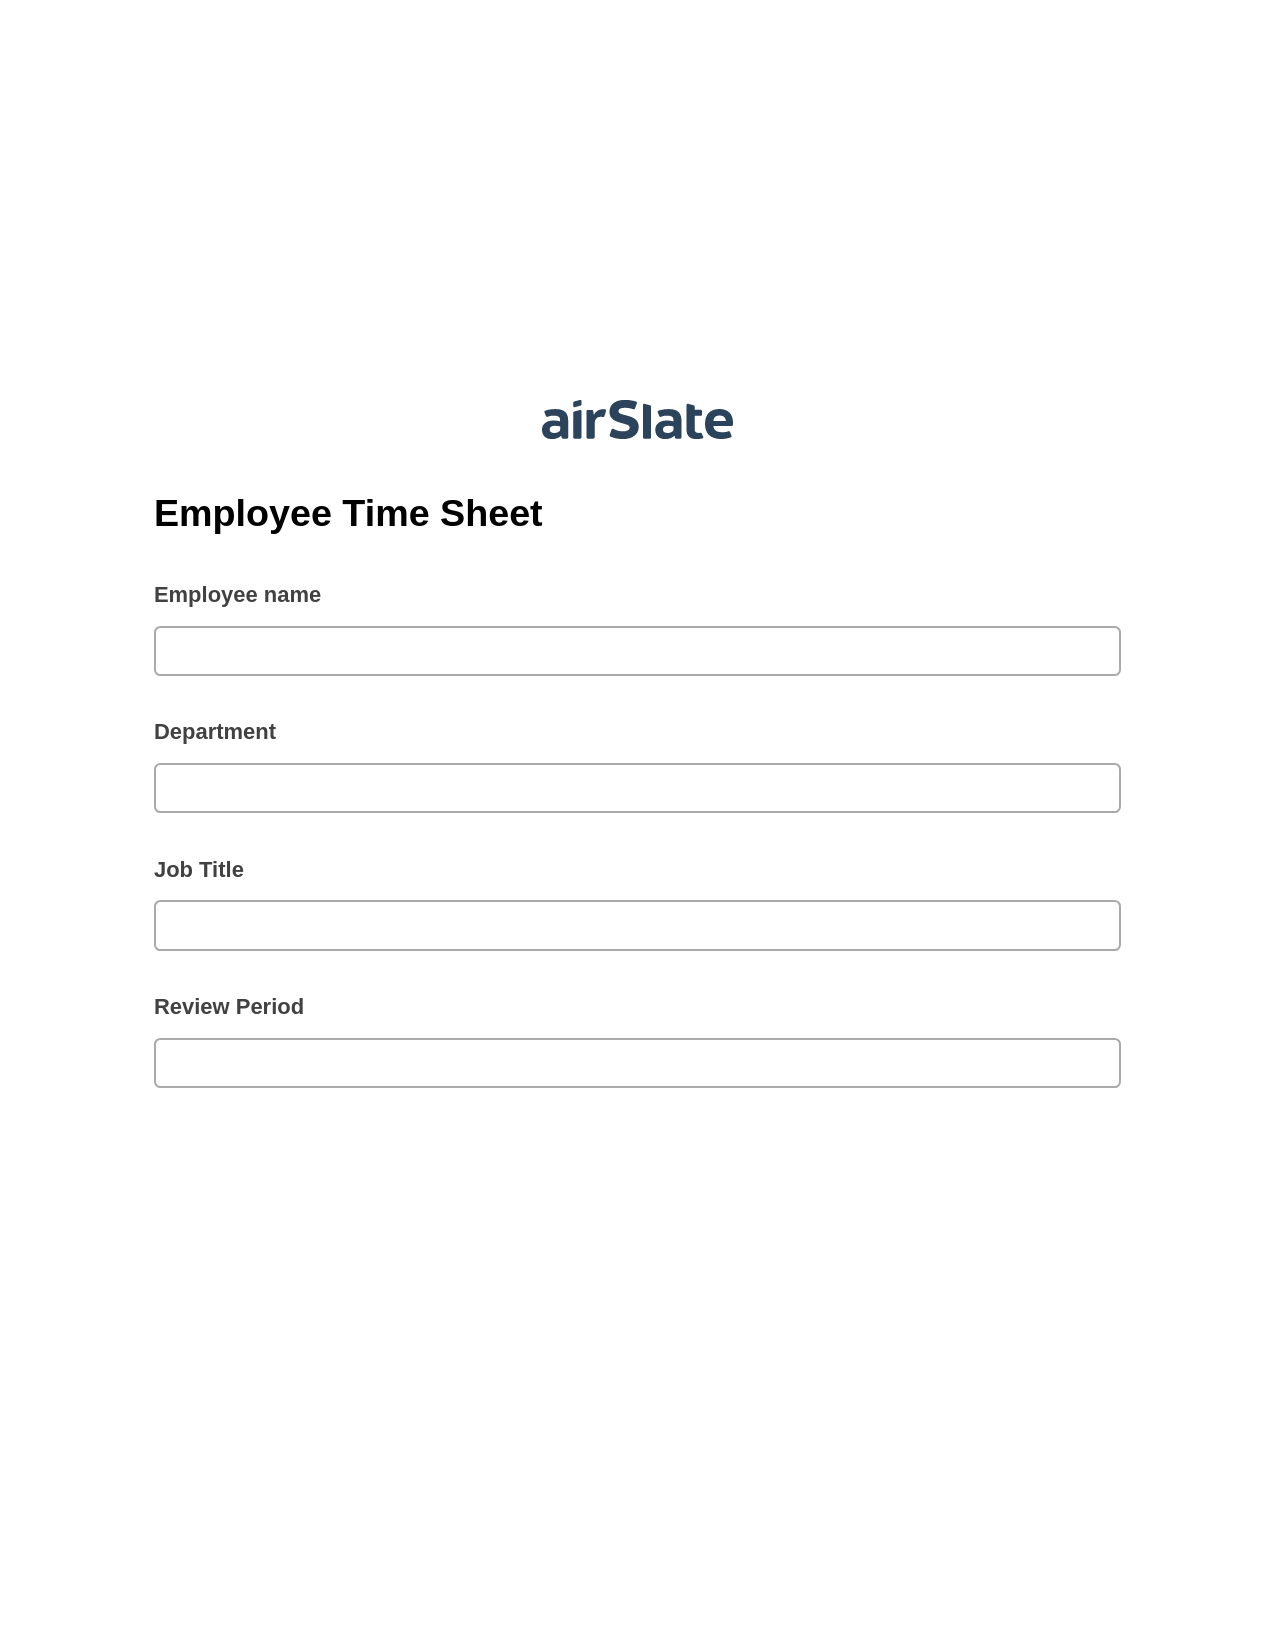 Employee Time Sheet Pre-fill from Excel Spreadsheet Bot, Create Salesforce Records Bot, Export to MySQL Bot